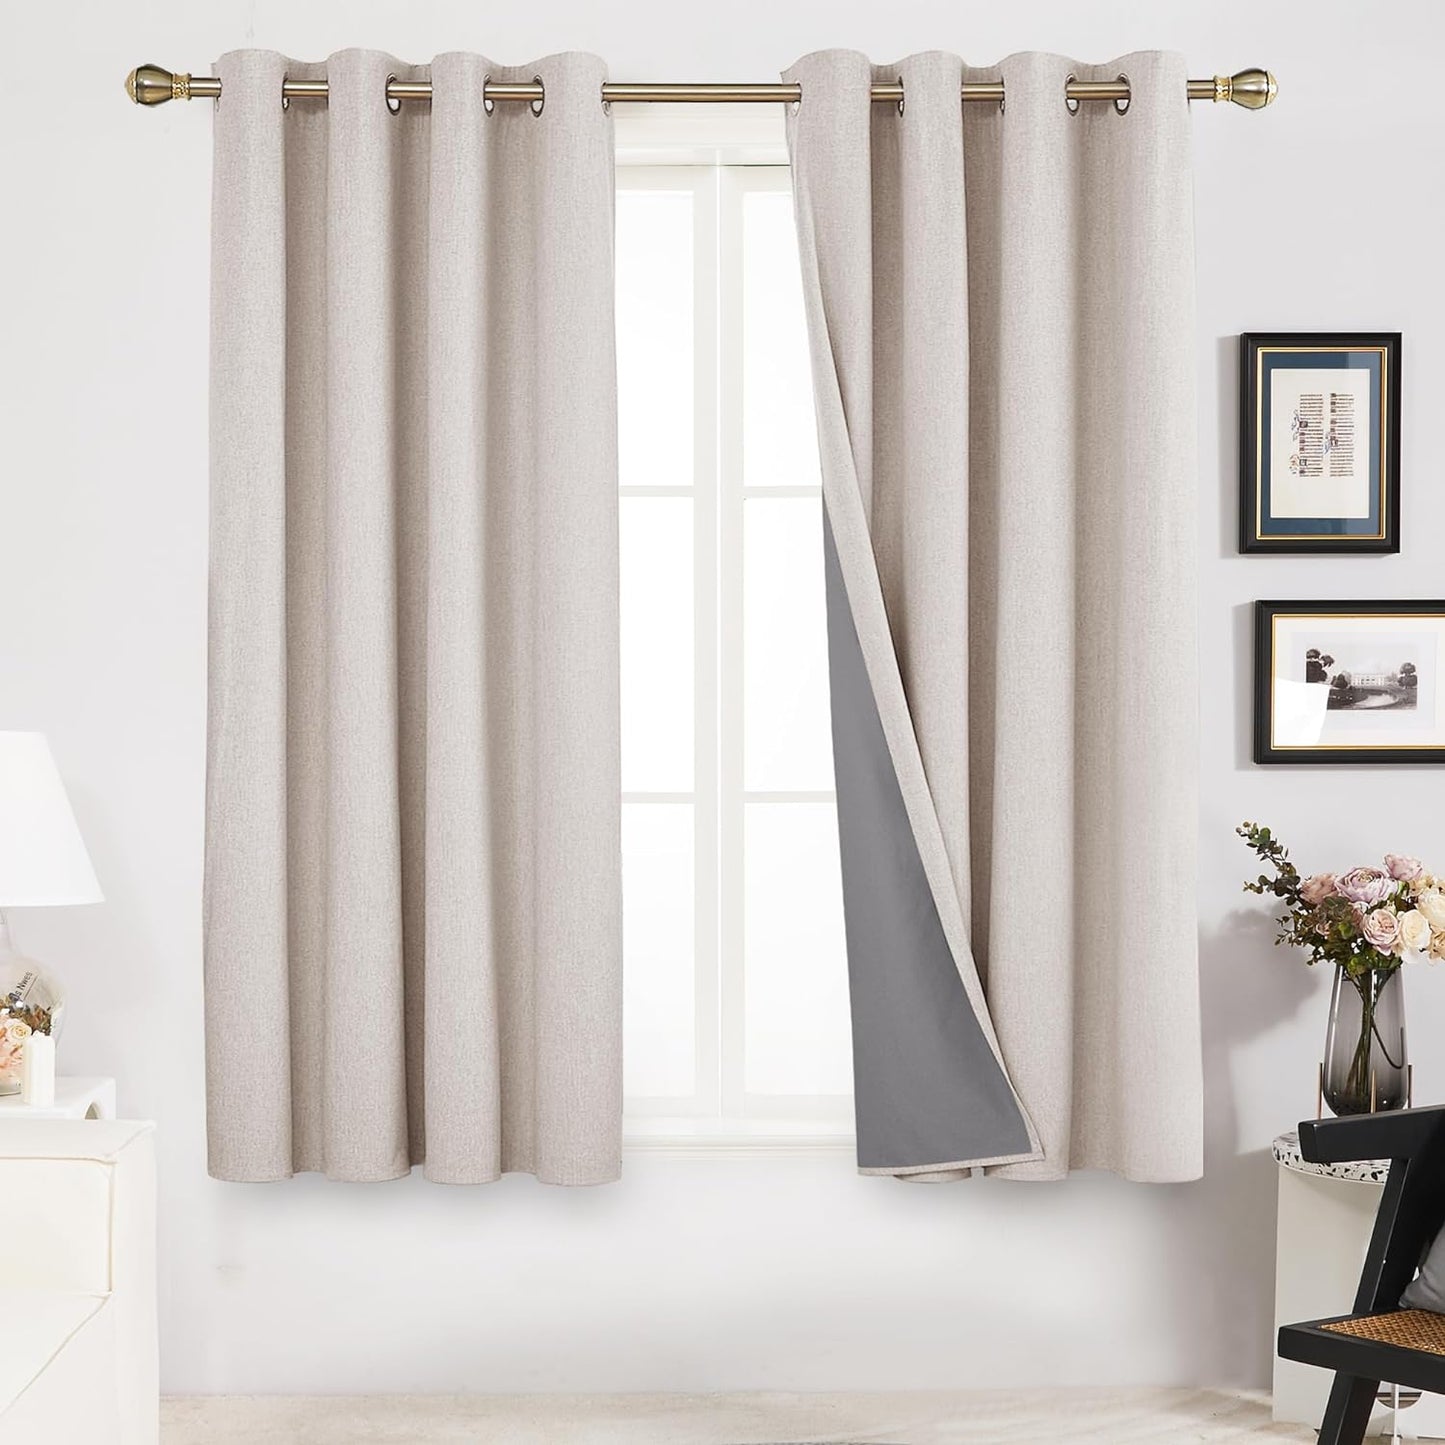 Deconovo Linen Blackout Curtains 84 Inch Length Set of 2, Thermal Curtain Drapes with Grey Coating, Total Light Blocking Waterproof Curtains for Indoor/Outdoor (Light Grey, 52W X 84L Inch)  Deconovo Flaxen 52X45 Inches 